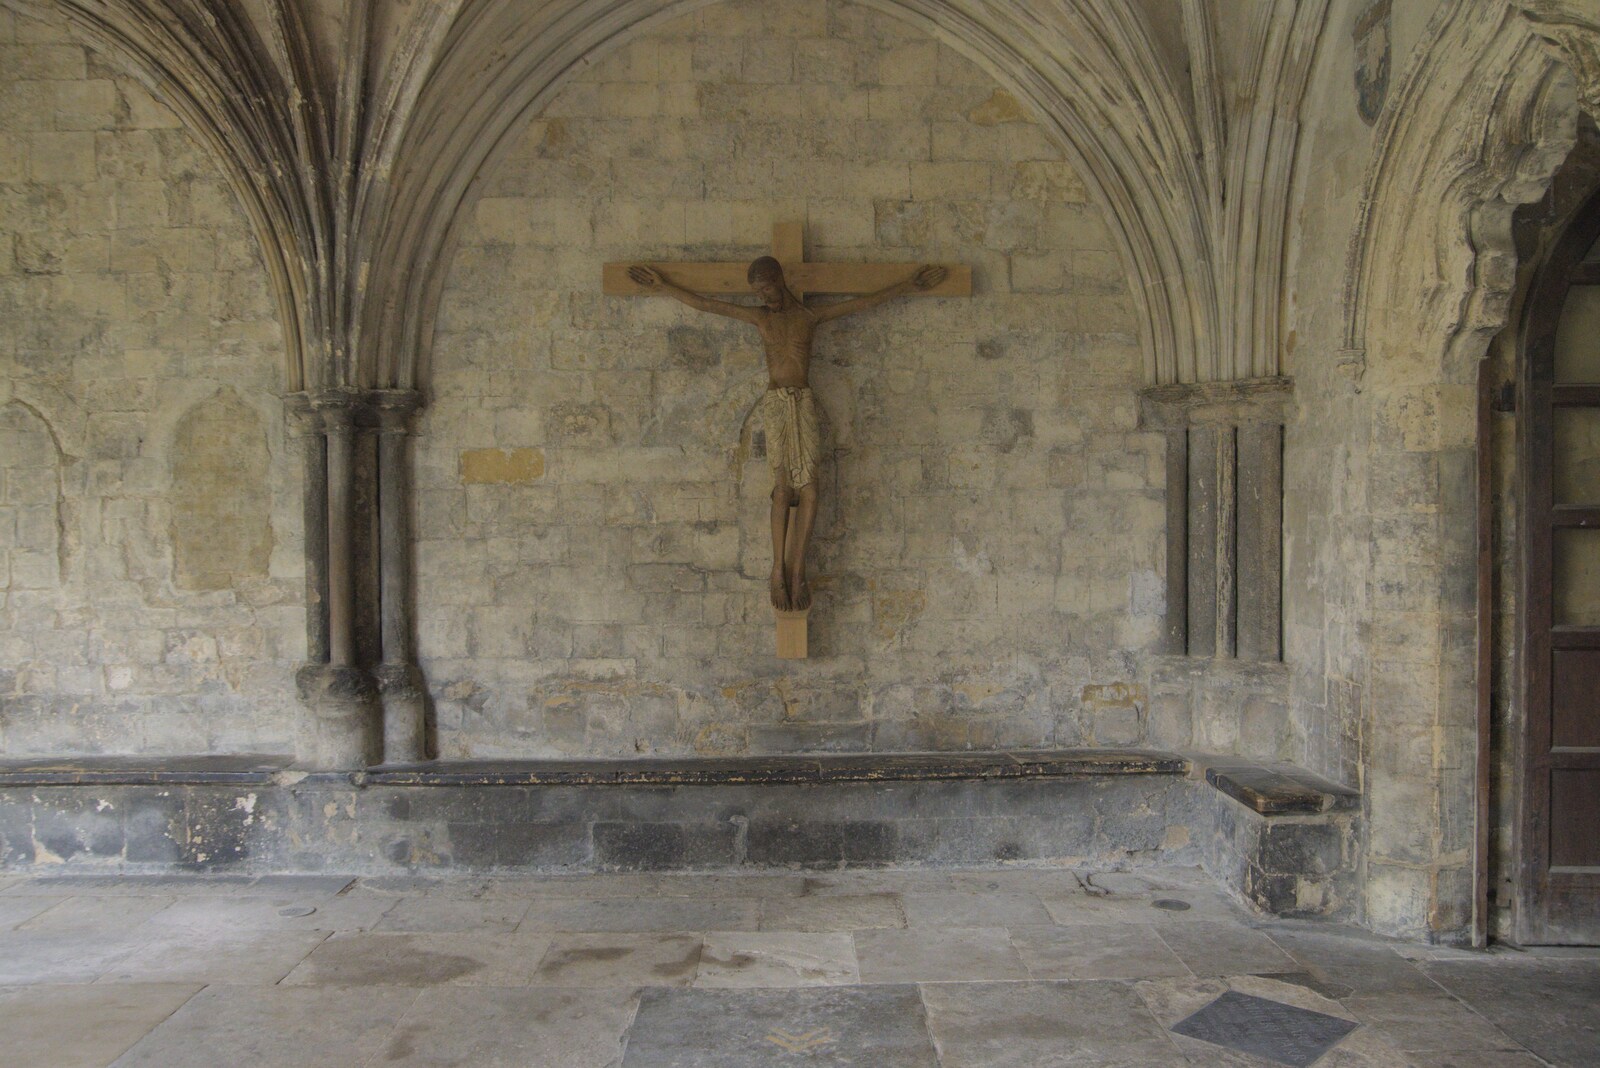 Jesus on the cross in the cloisters from A Tour of the Cathedral, Norwich, Norfolk - 2nd December 2023